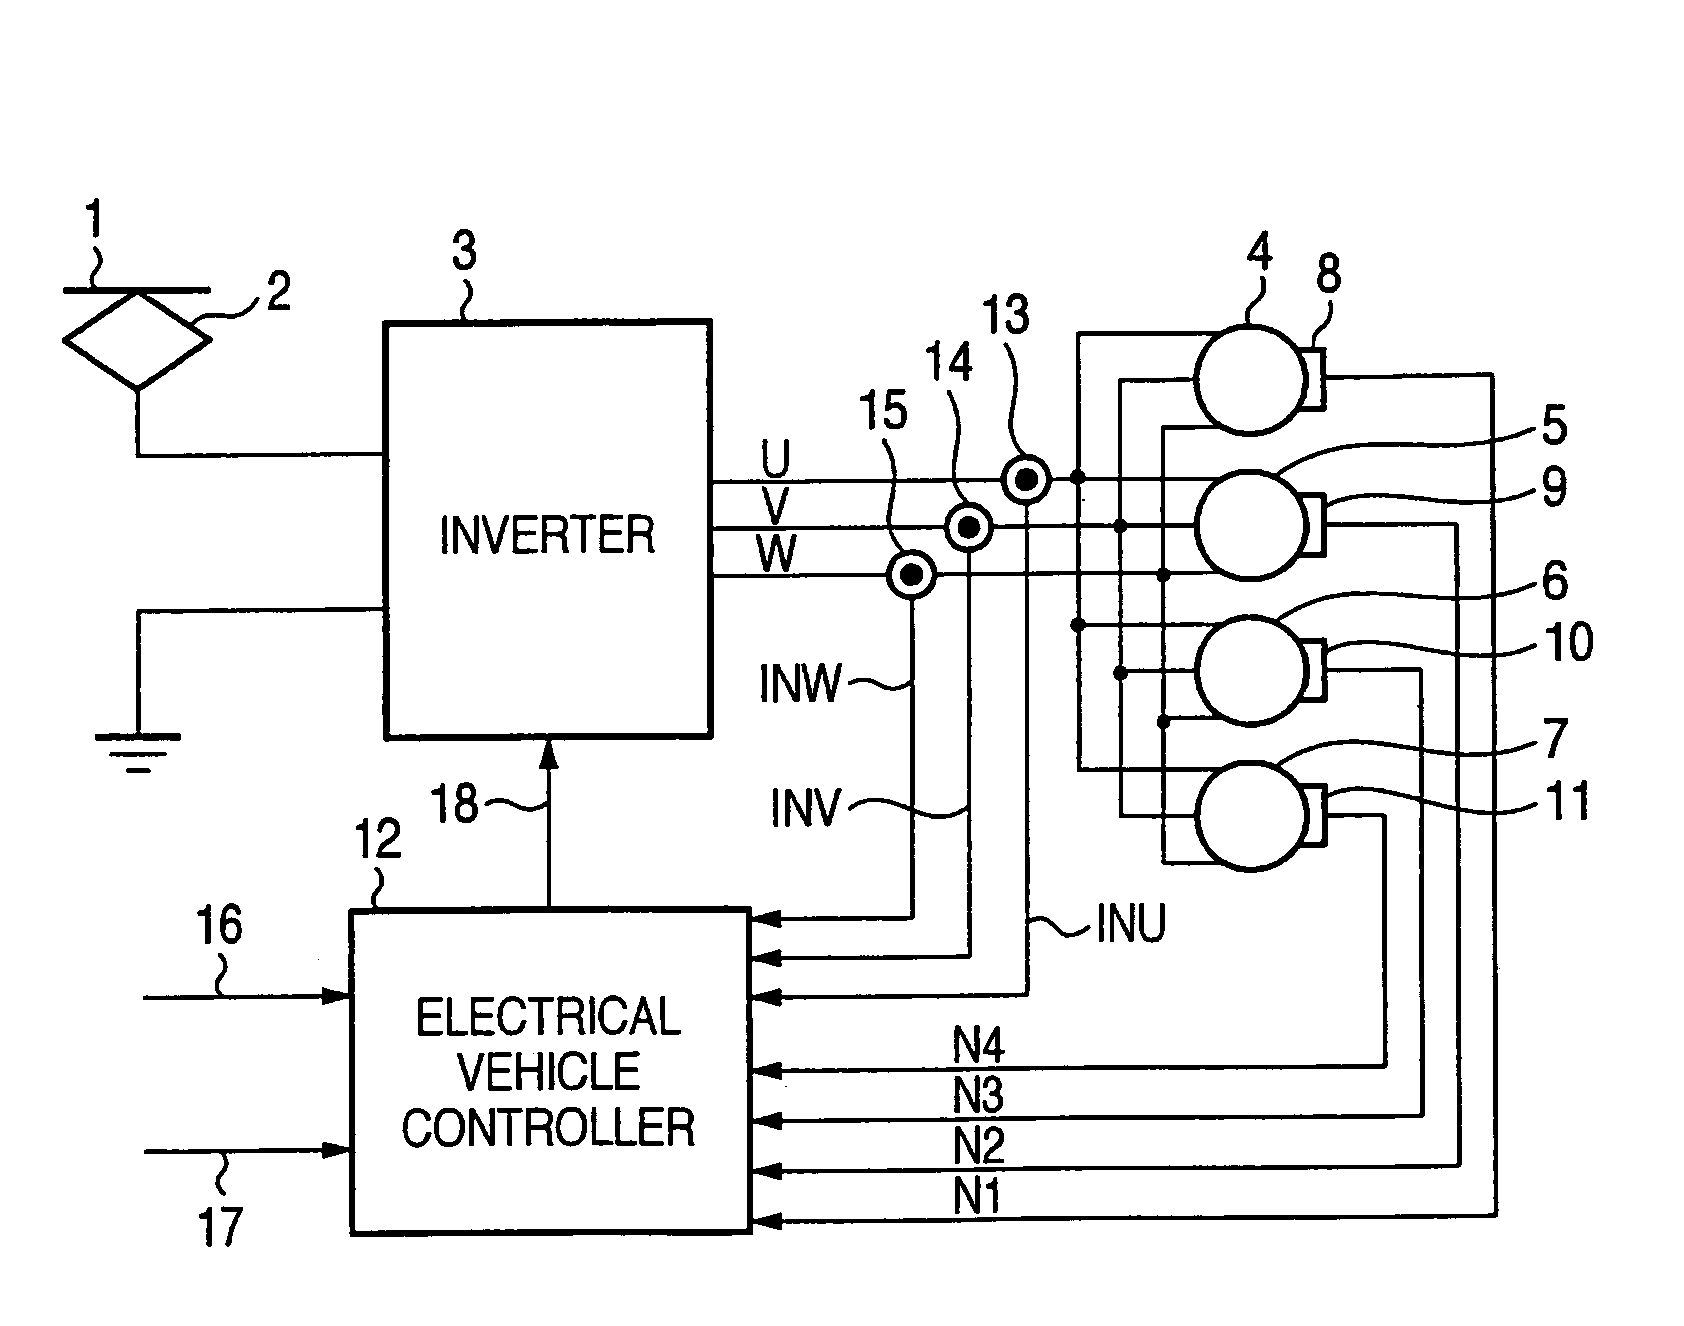 Electrical vehicle controller